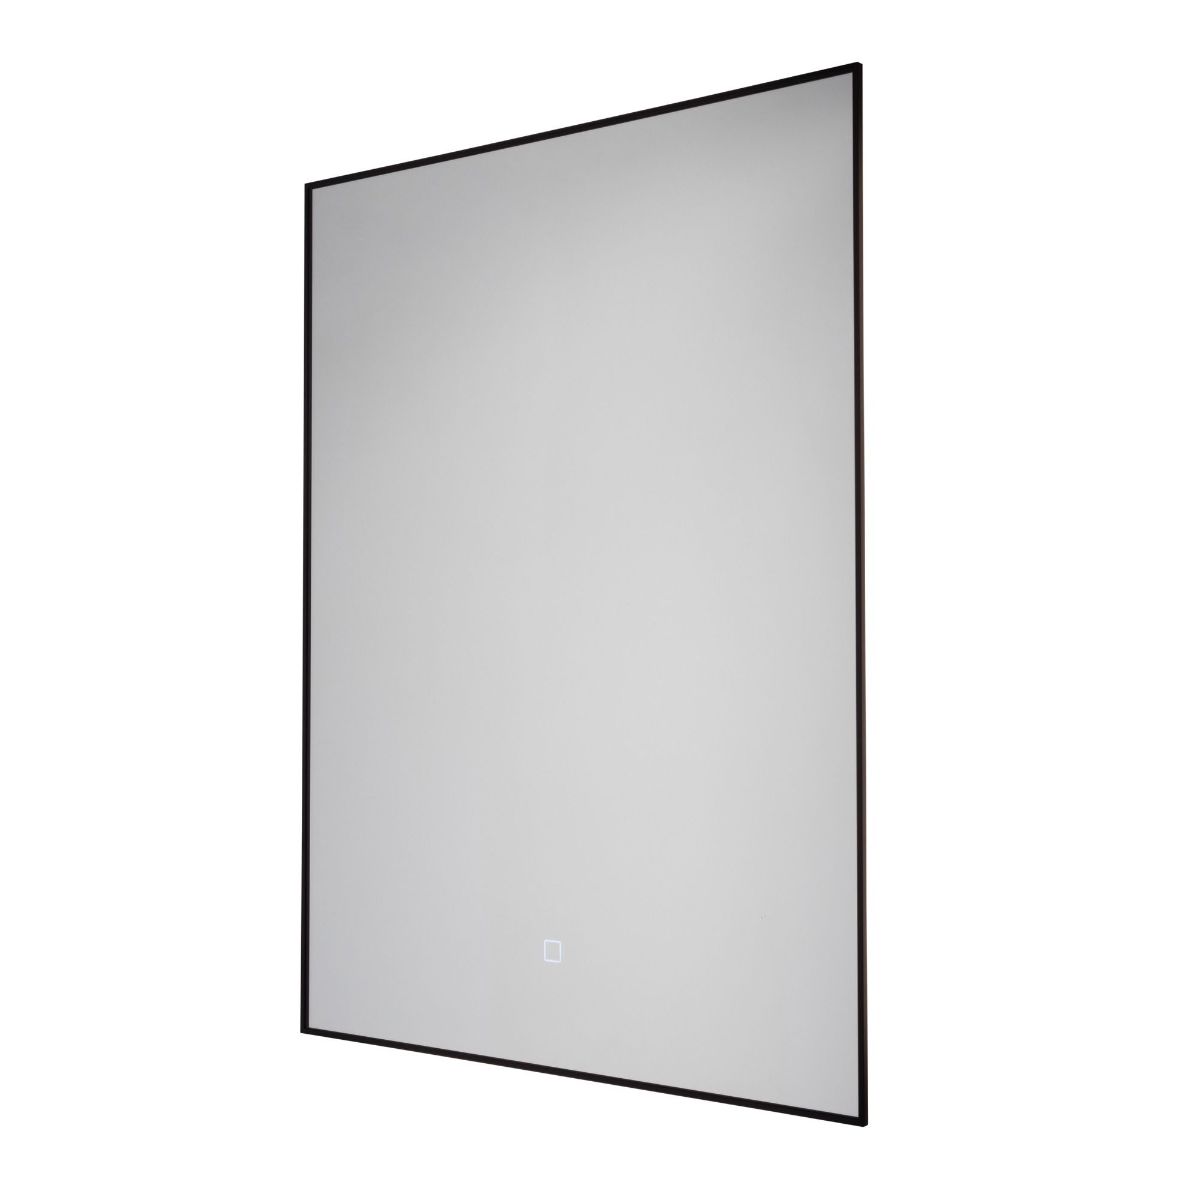 Reflections 31.5 In. X 23 In. LED Wall Mirror Matte Black Finish